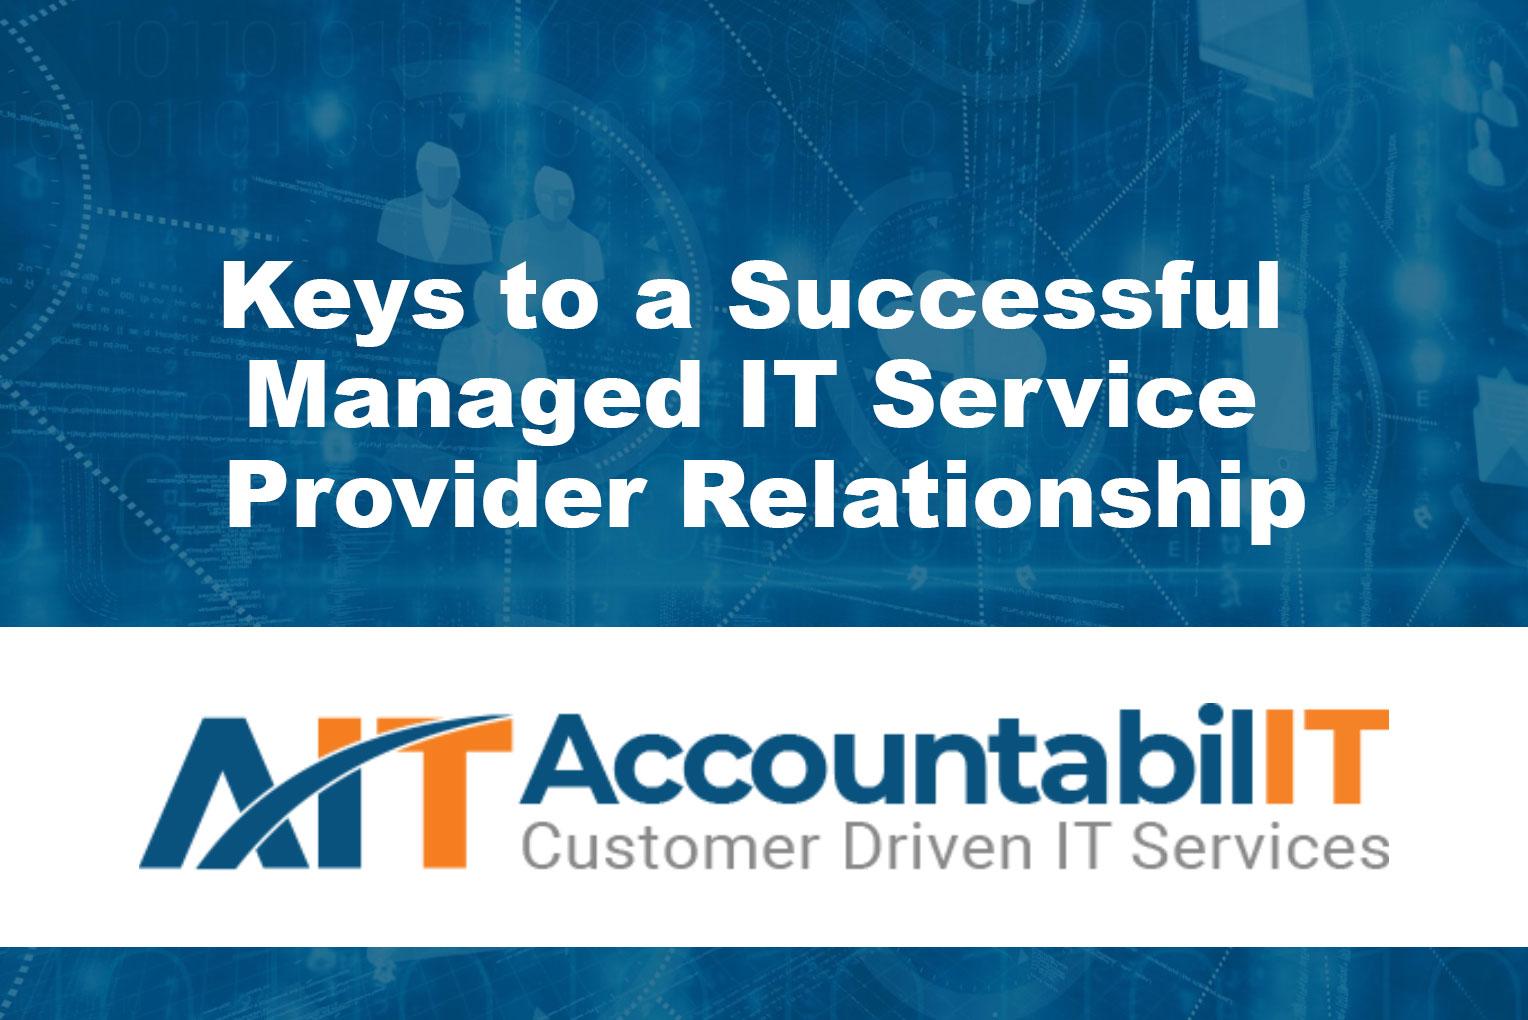 Keys to a Successful Managed IT Service Provider Relationship